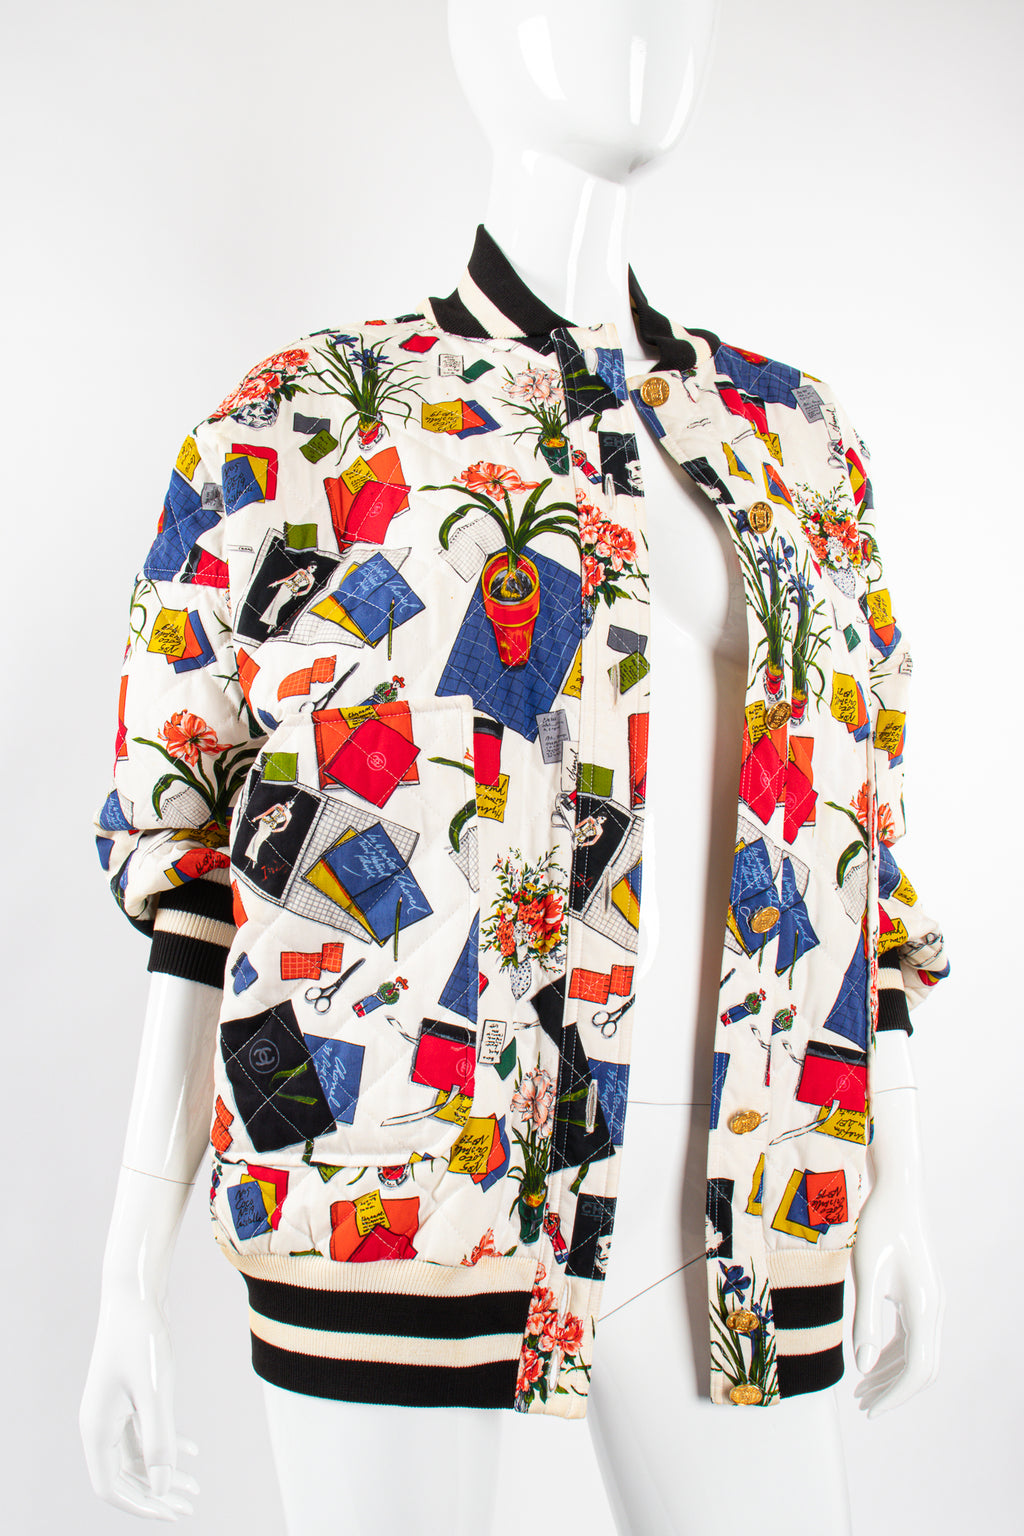 Chanel Vintage Quilted Bomber Jacket, $5,952, farfetch.com